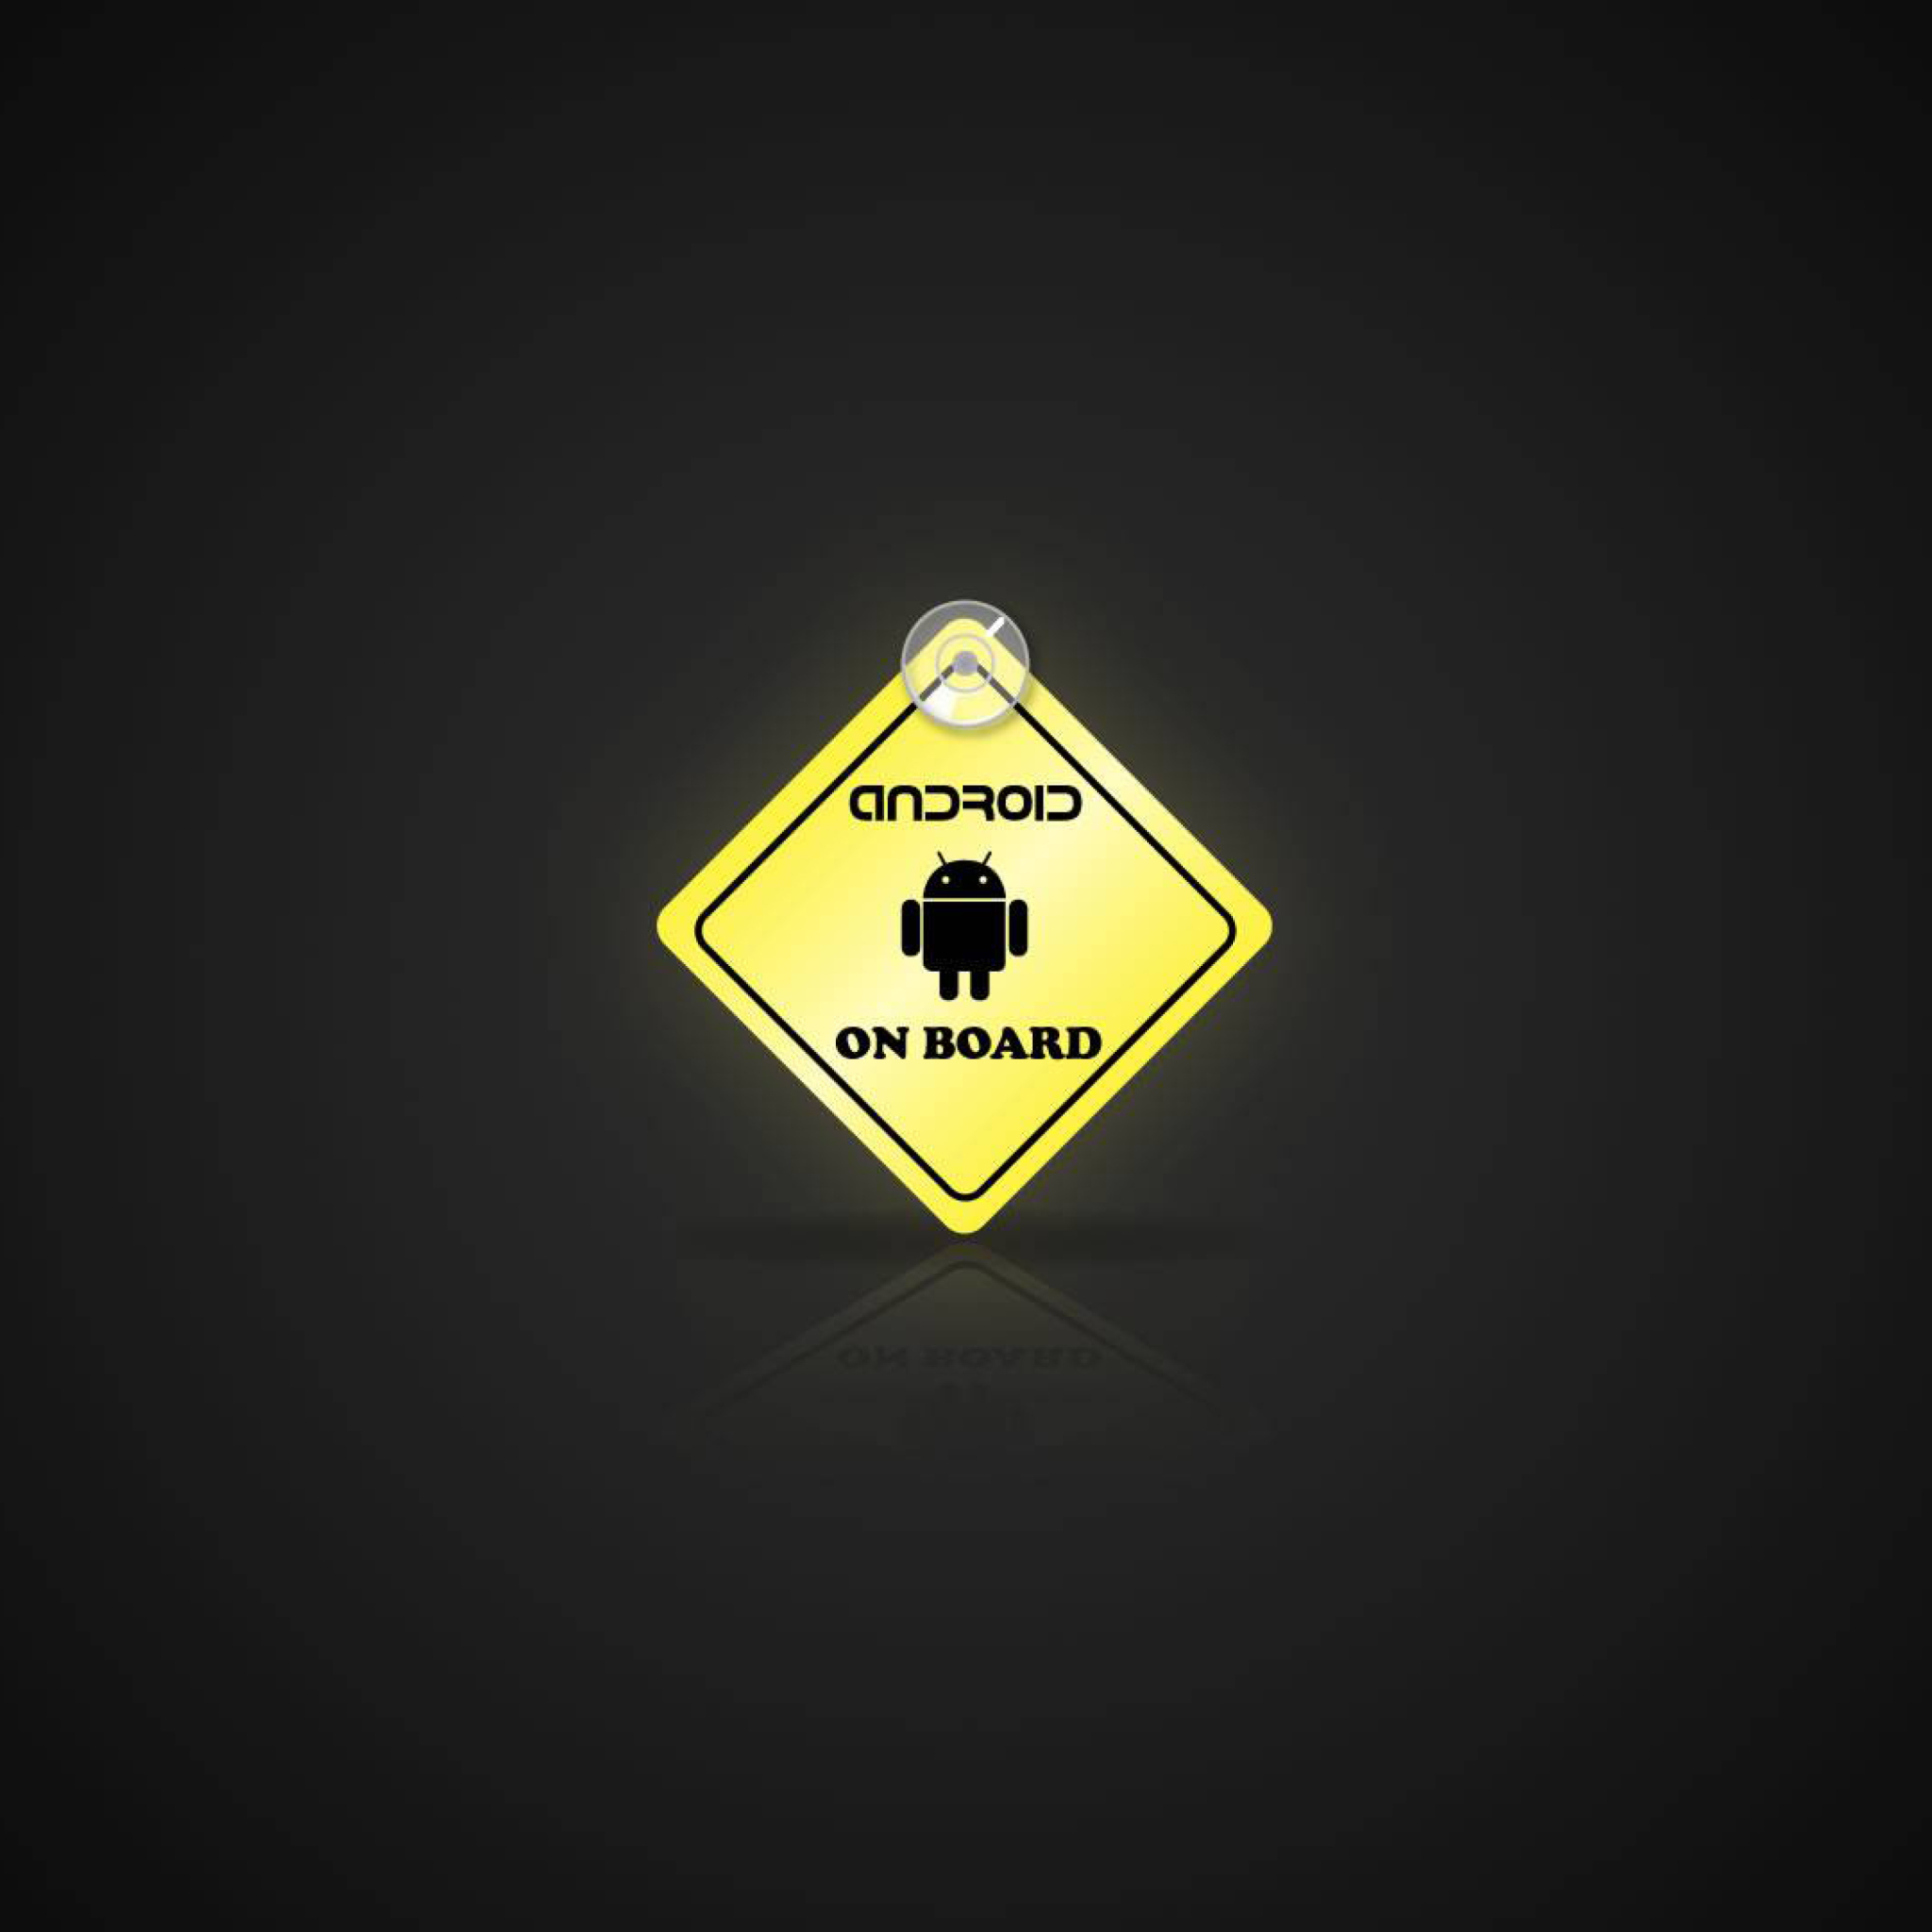 Android On Board wallpaper 2048x2048